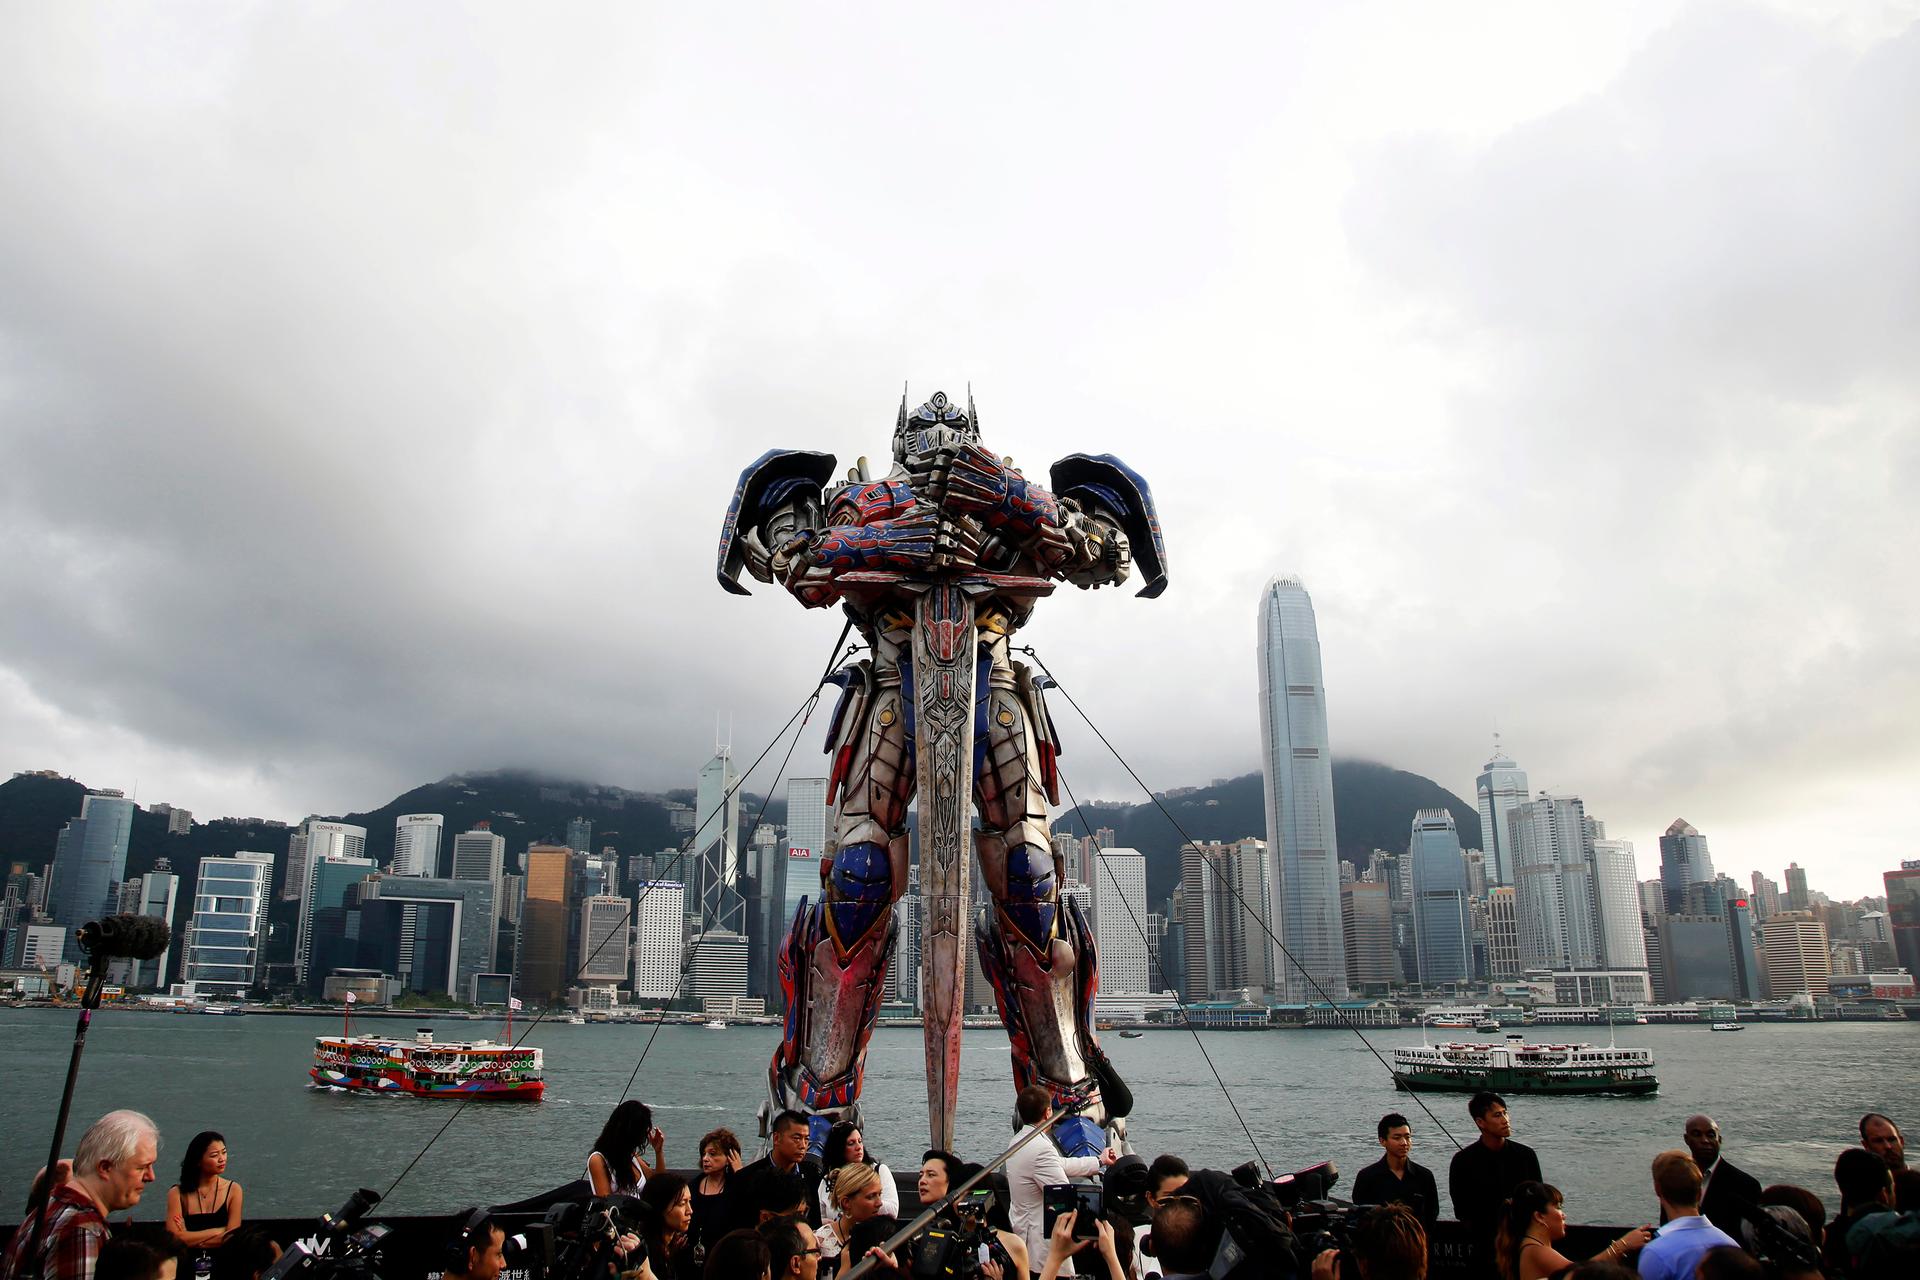 A 21-foot tall model of the Transformers character Optimus Prime is displayed on the red carpet before the world premiere of the film "Transformers: Age of Extinction" in Hong Kong.